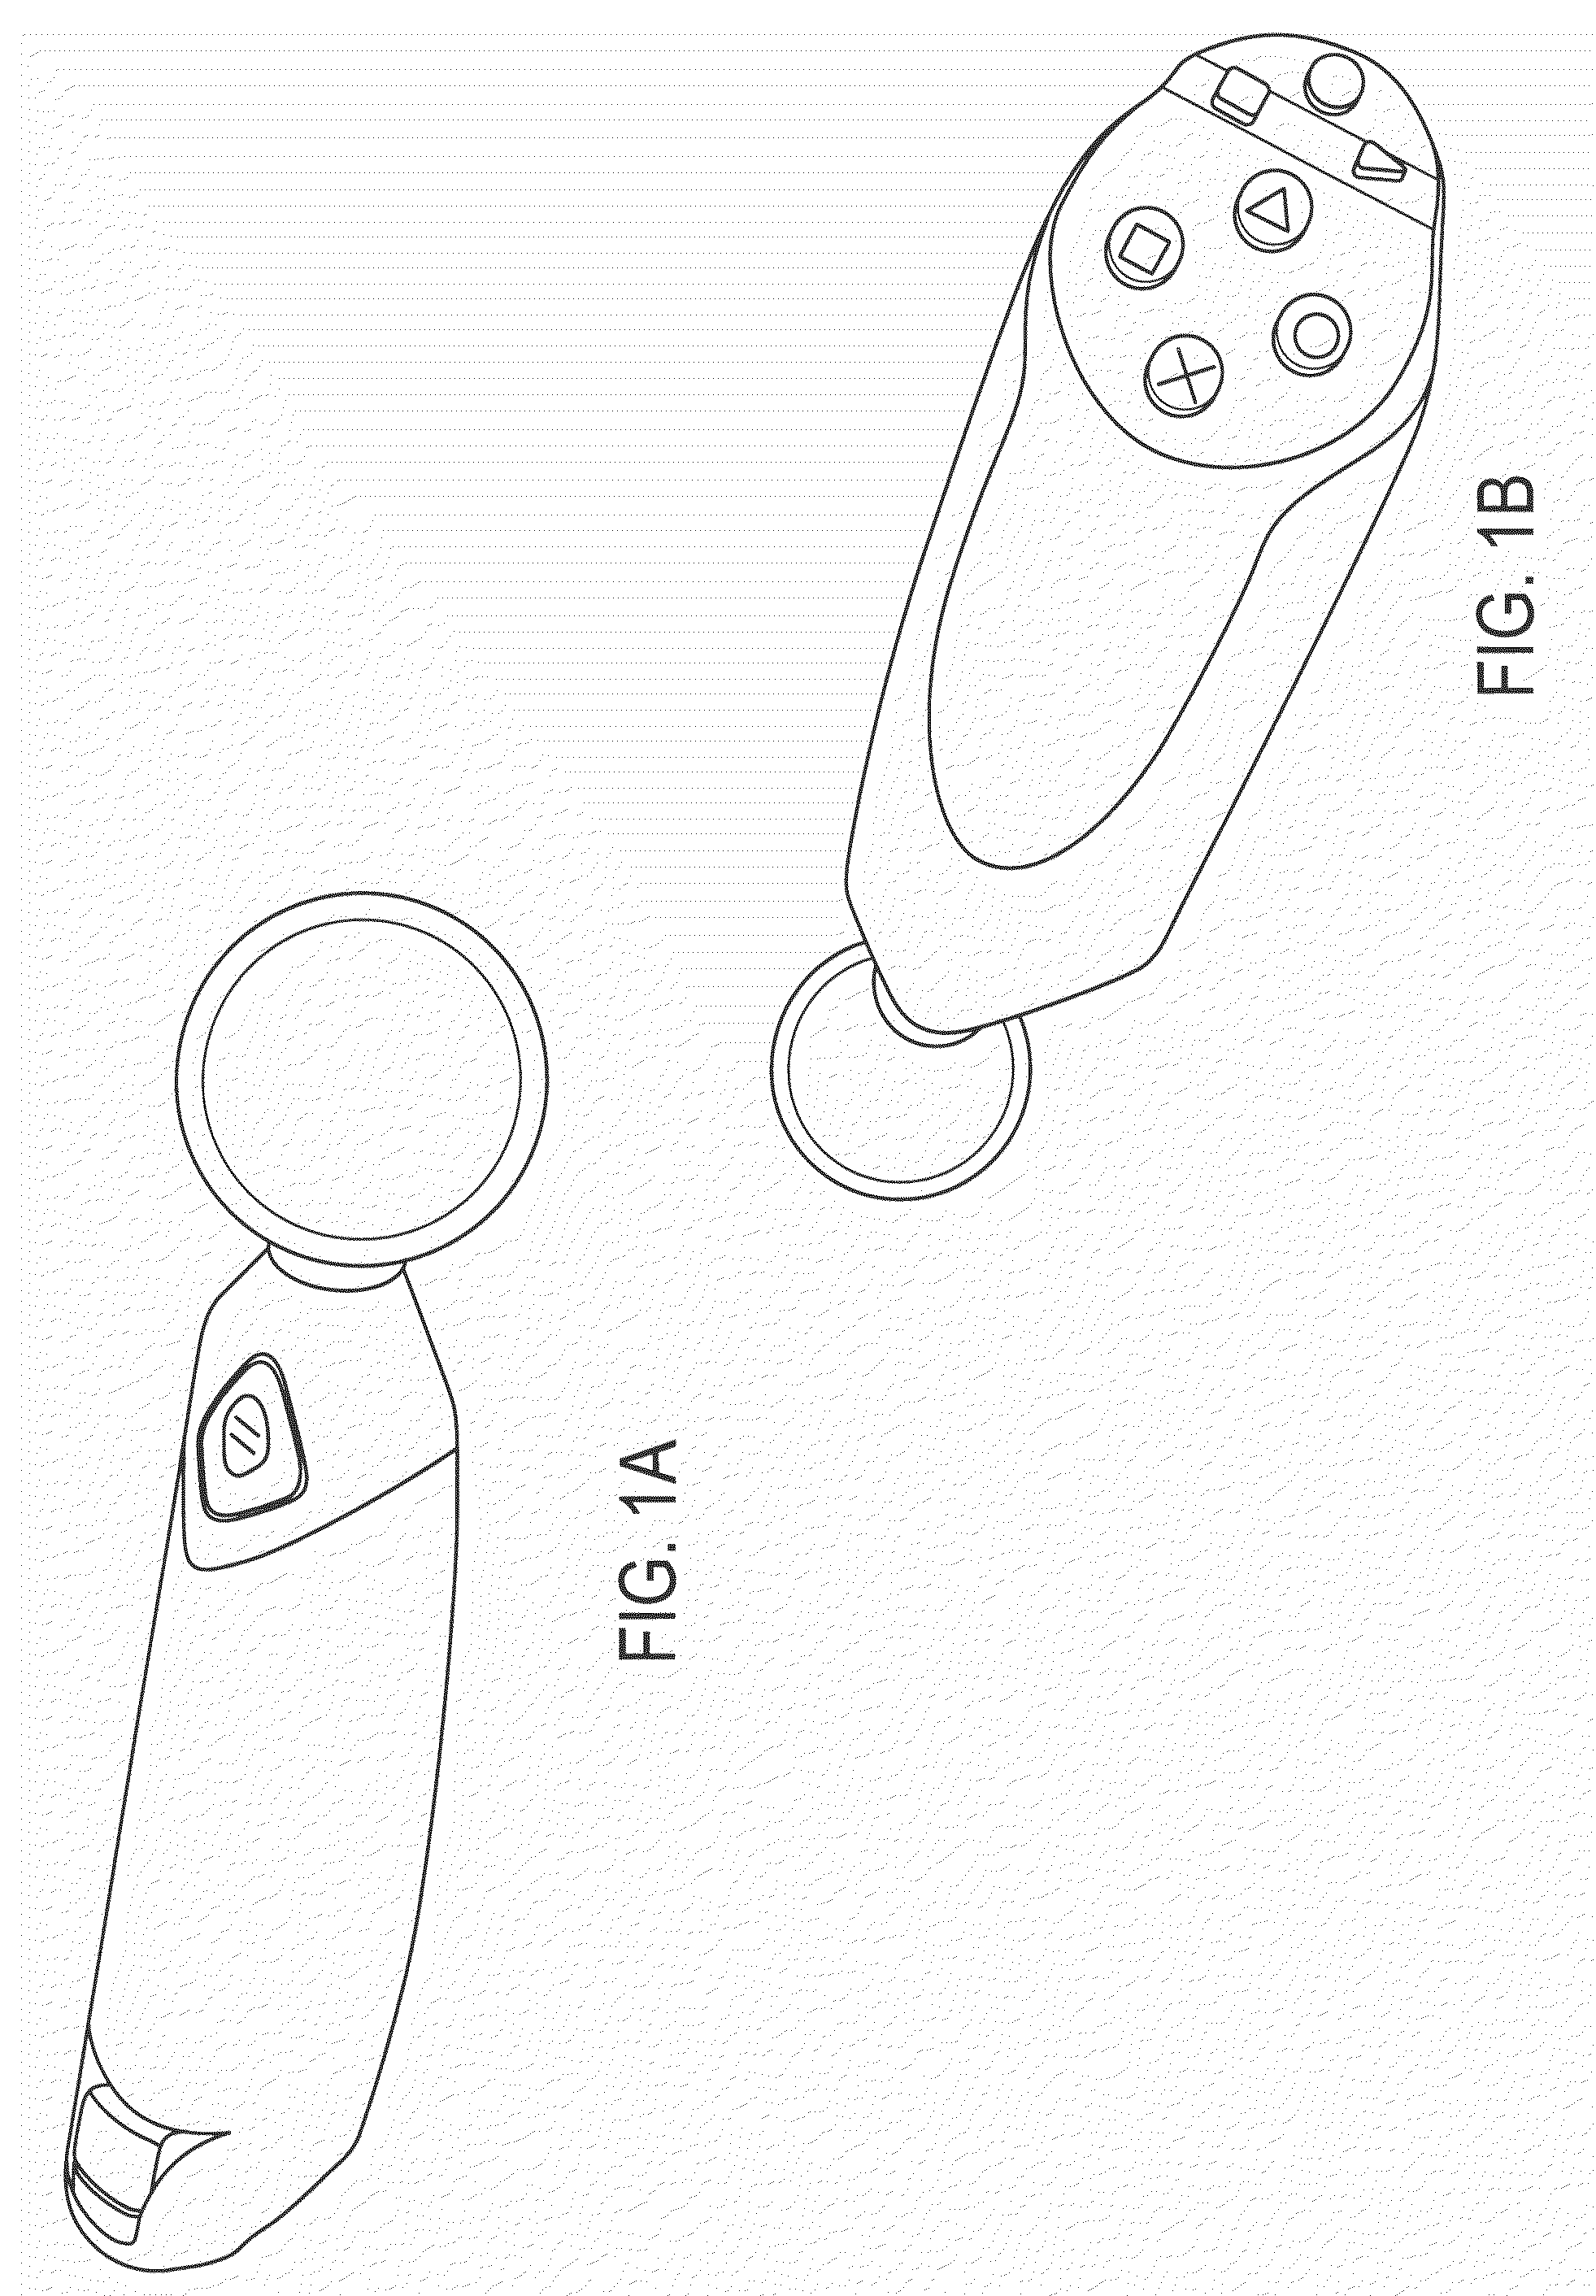 Determining location and movement of ball-attached controller